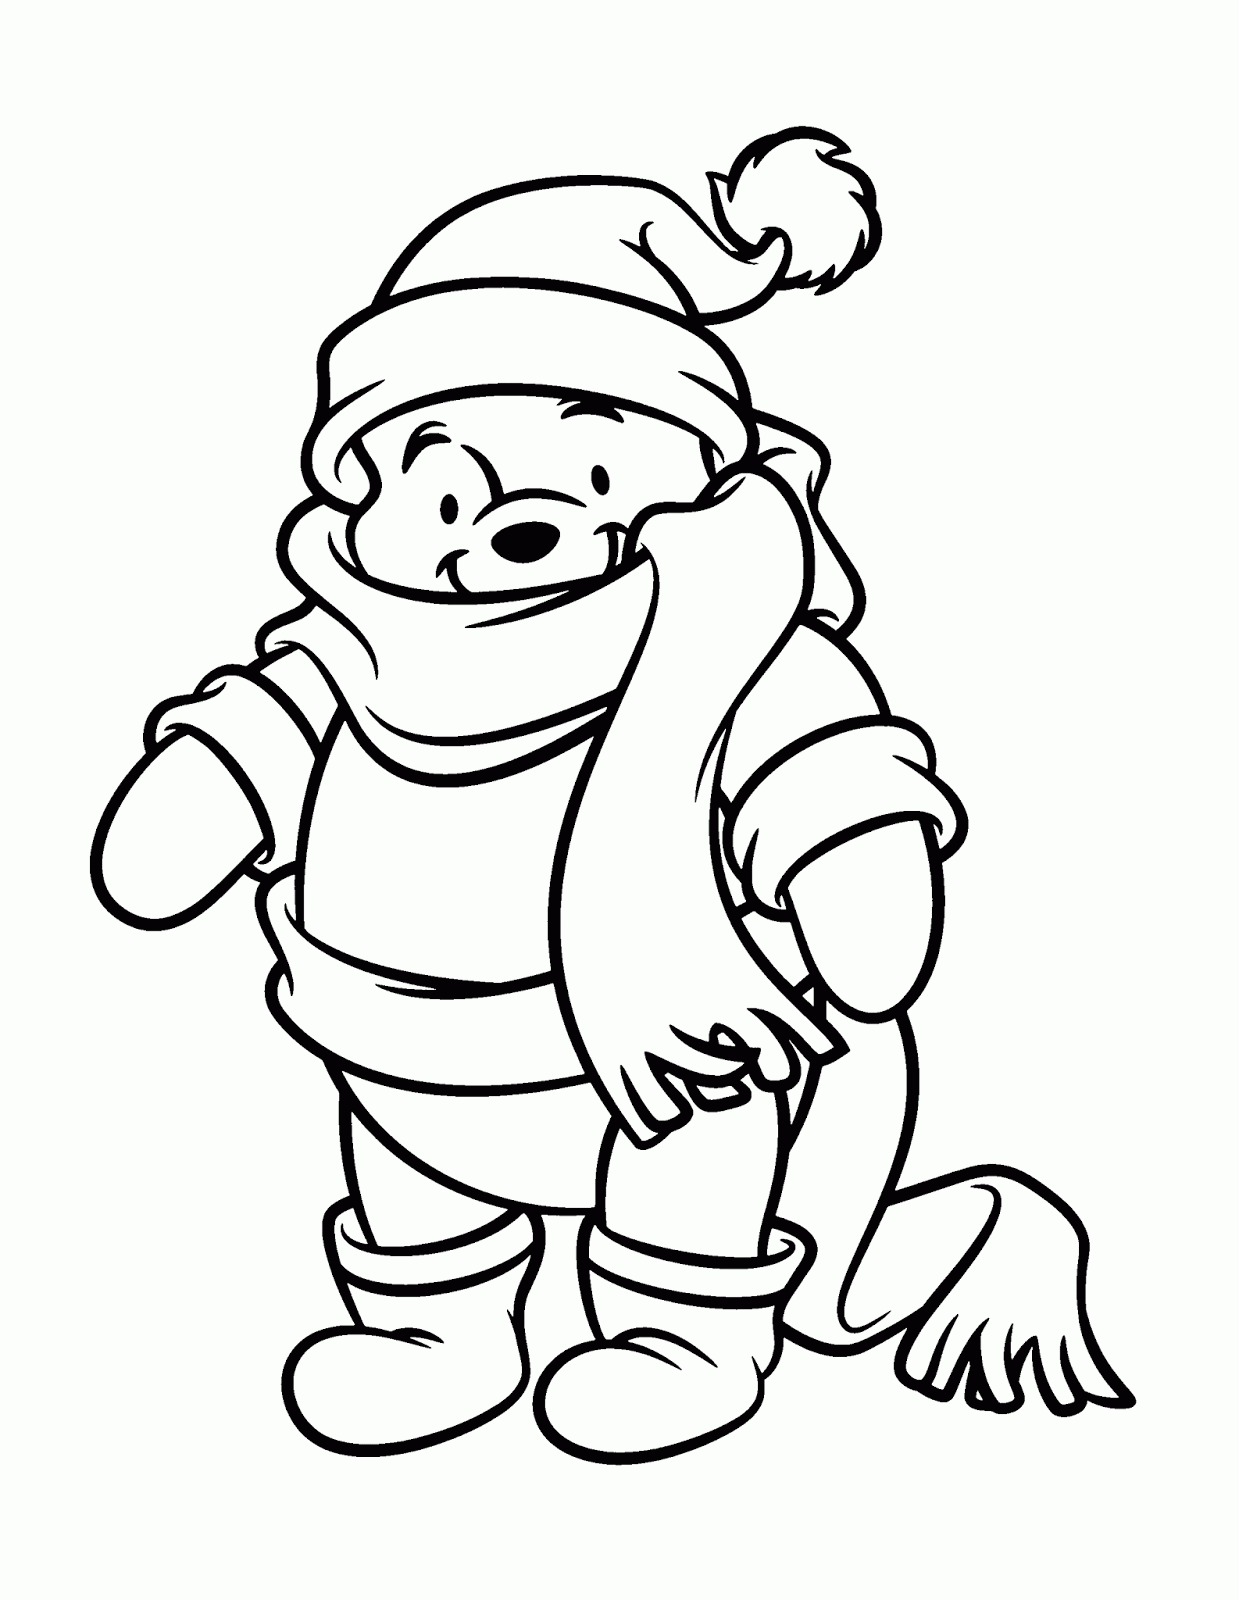 7 Winnie The Pooh Christmas Coloring Pages